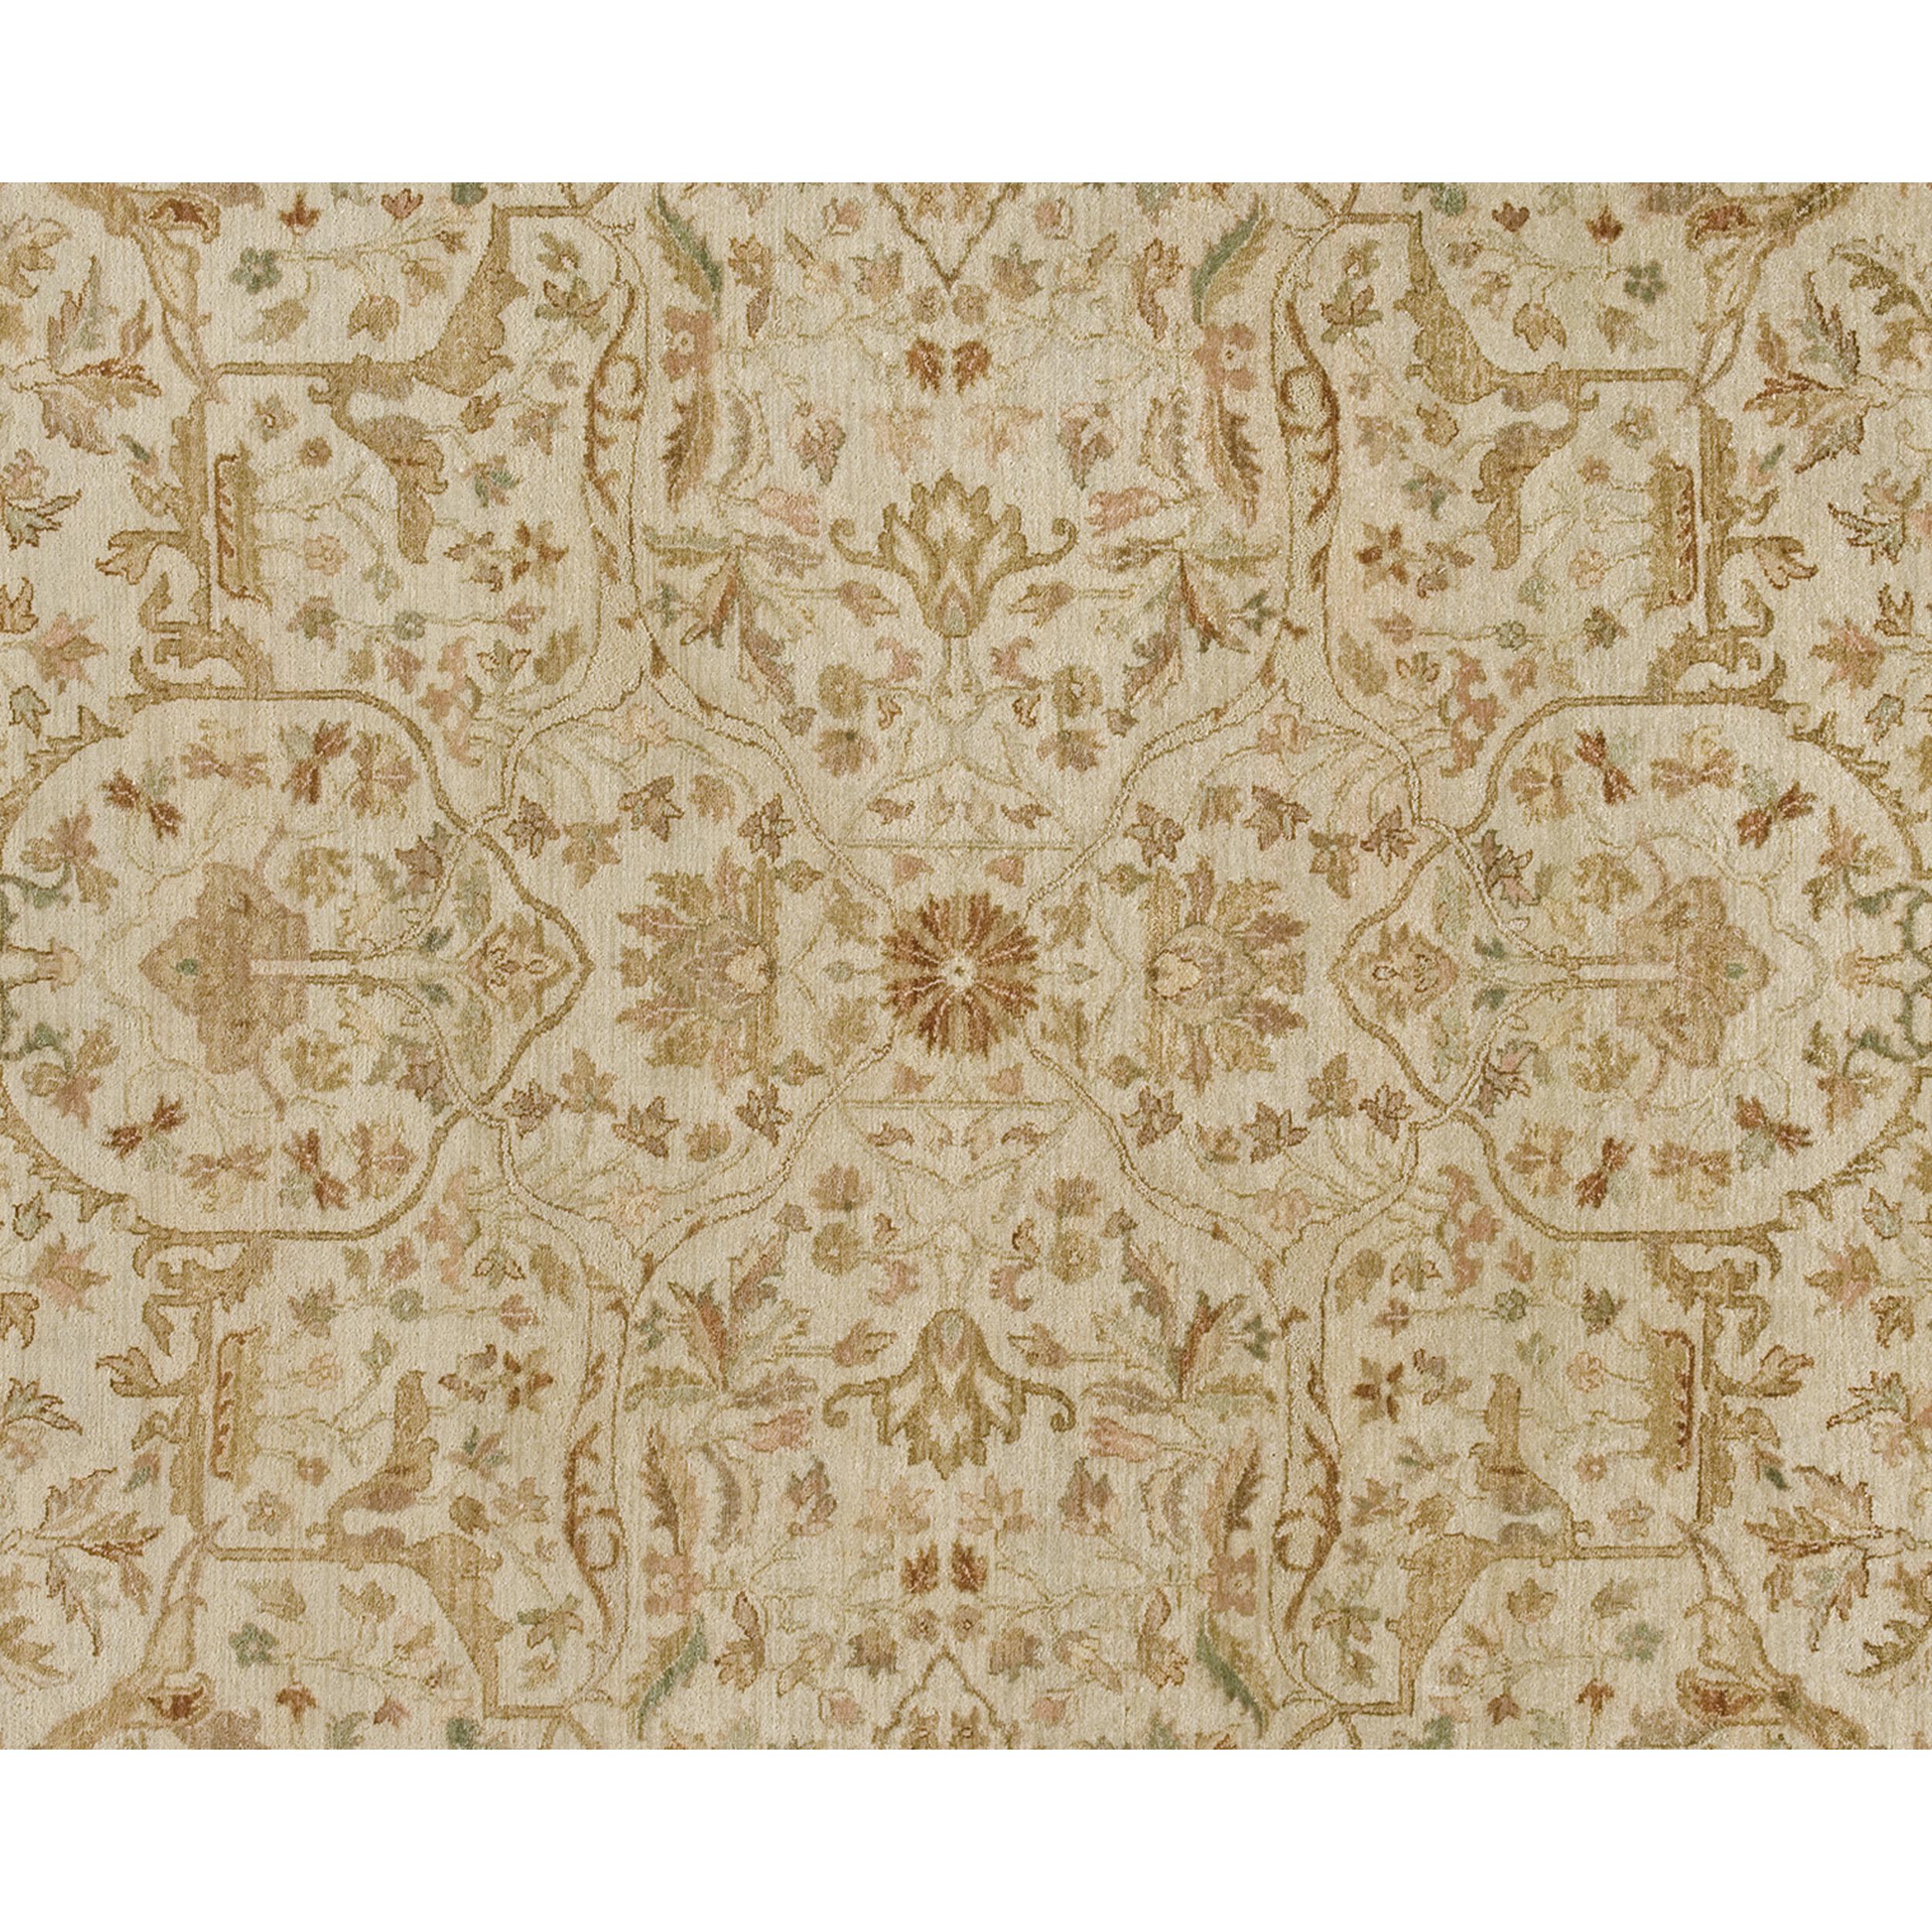 Agra Luxury Traditional Hand-Knotted Ivory/ Bronze 14x28 14x28 Rug For Sale